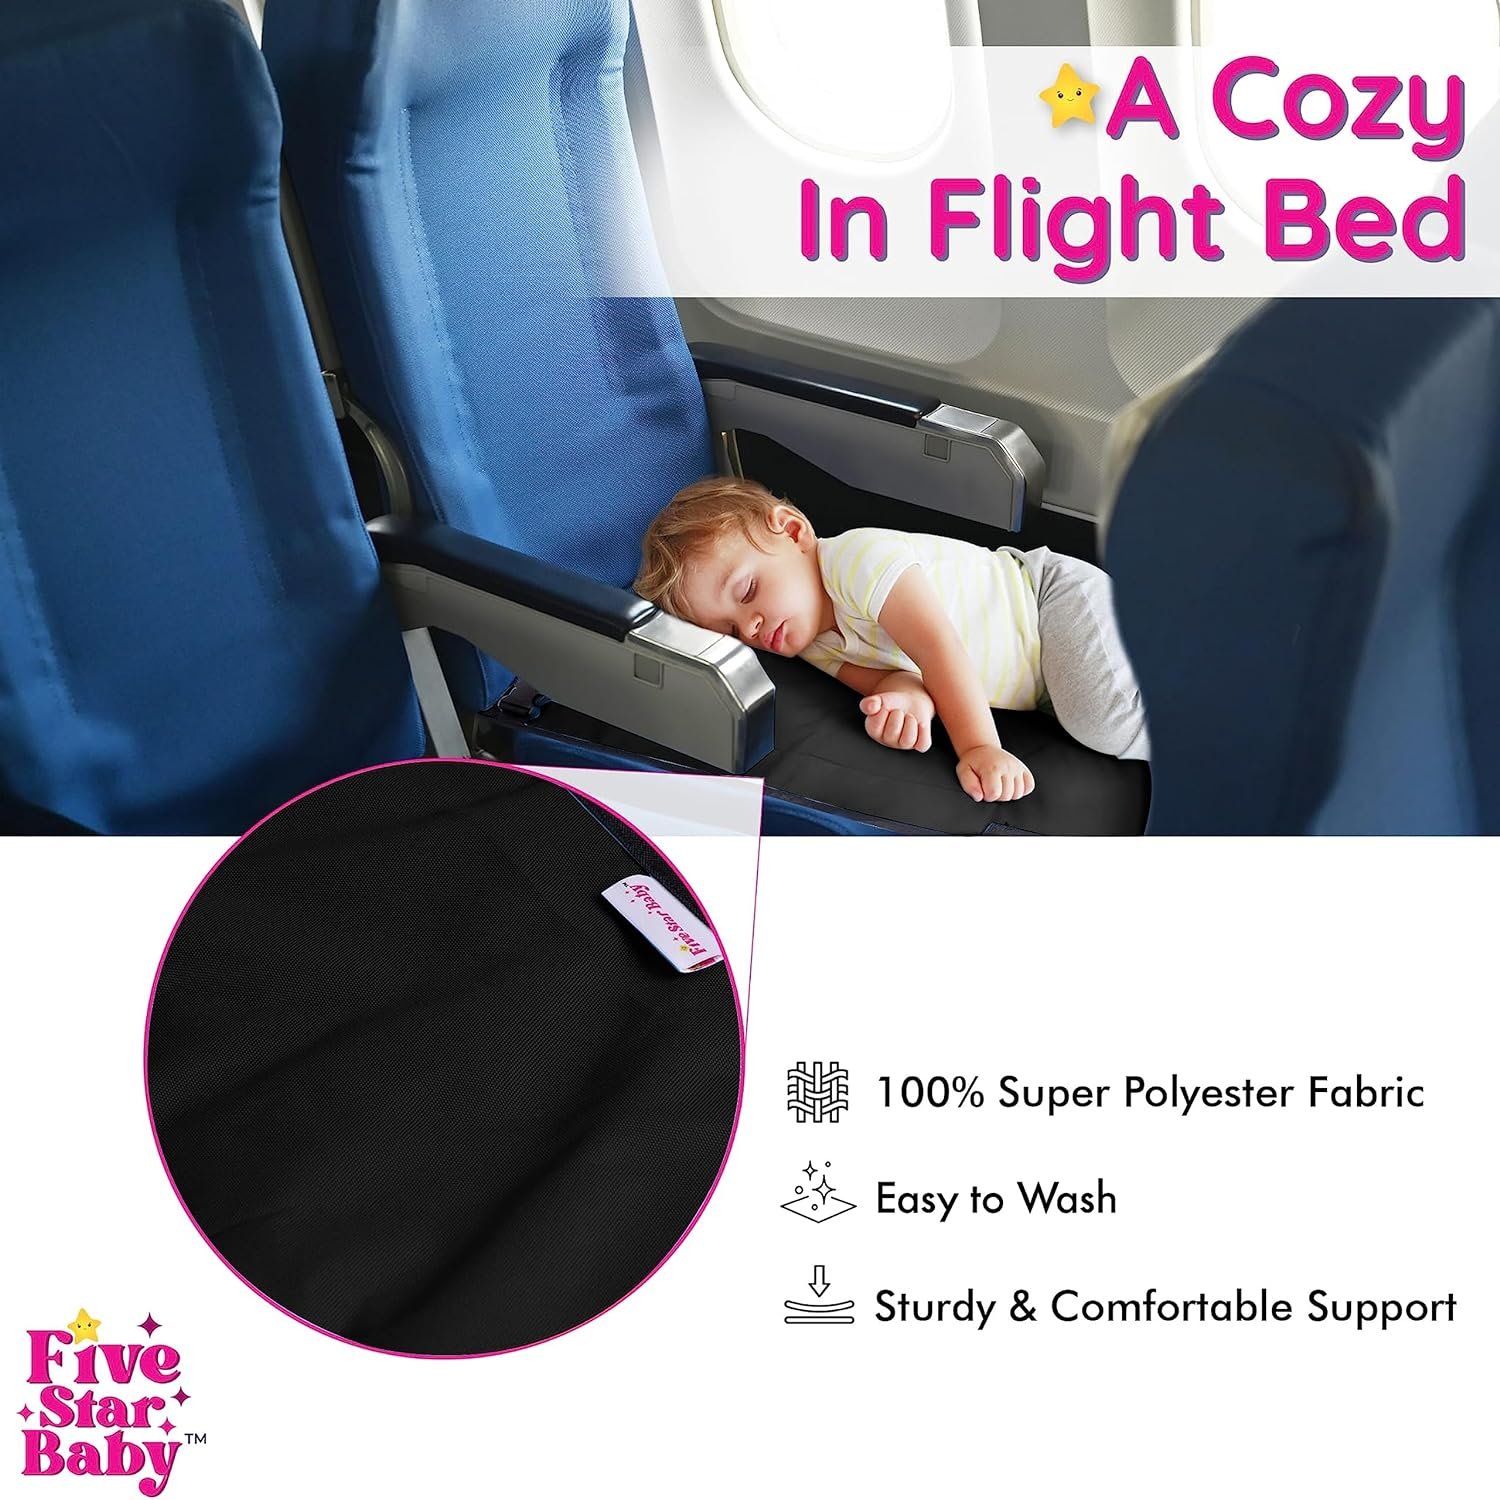 Toddler Airplane Bed Review